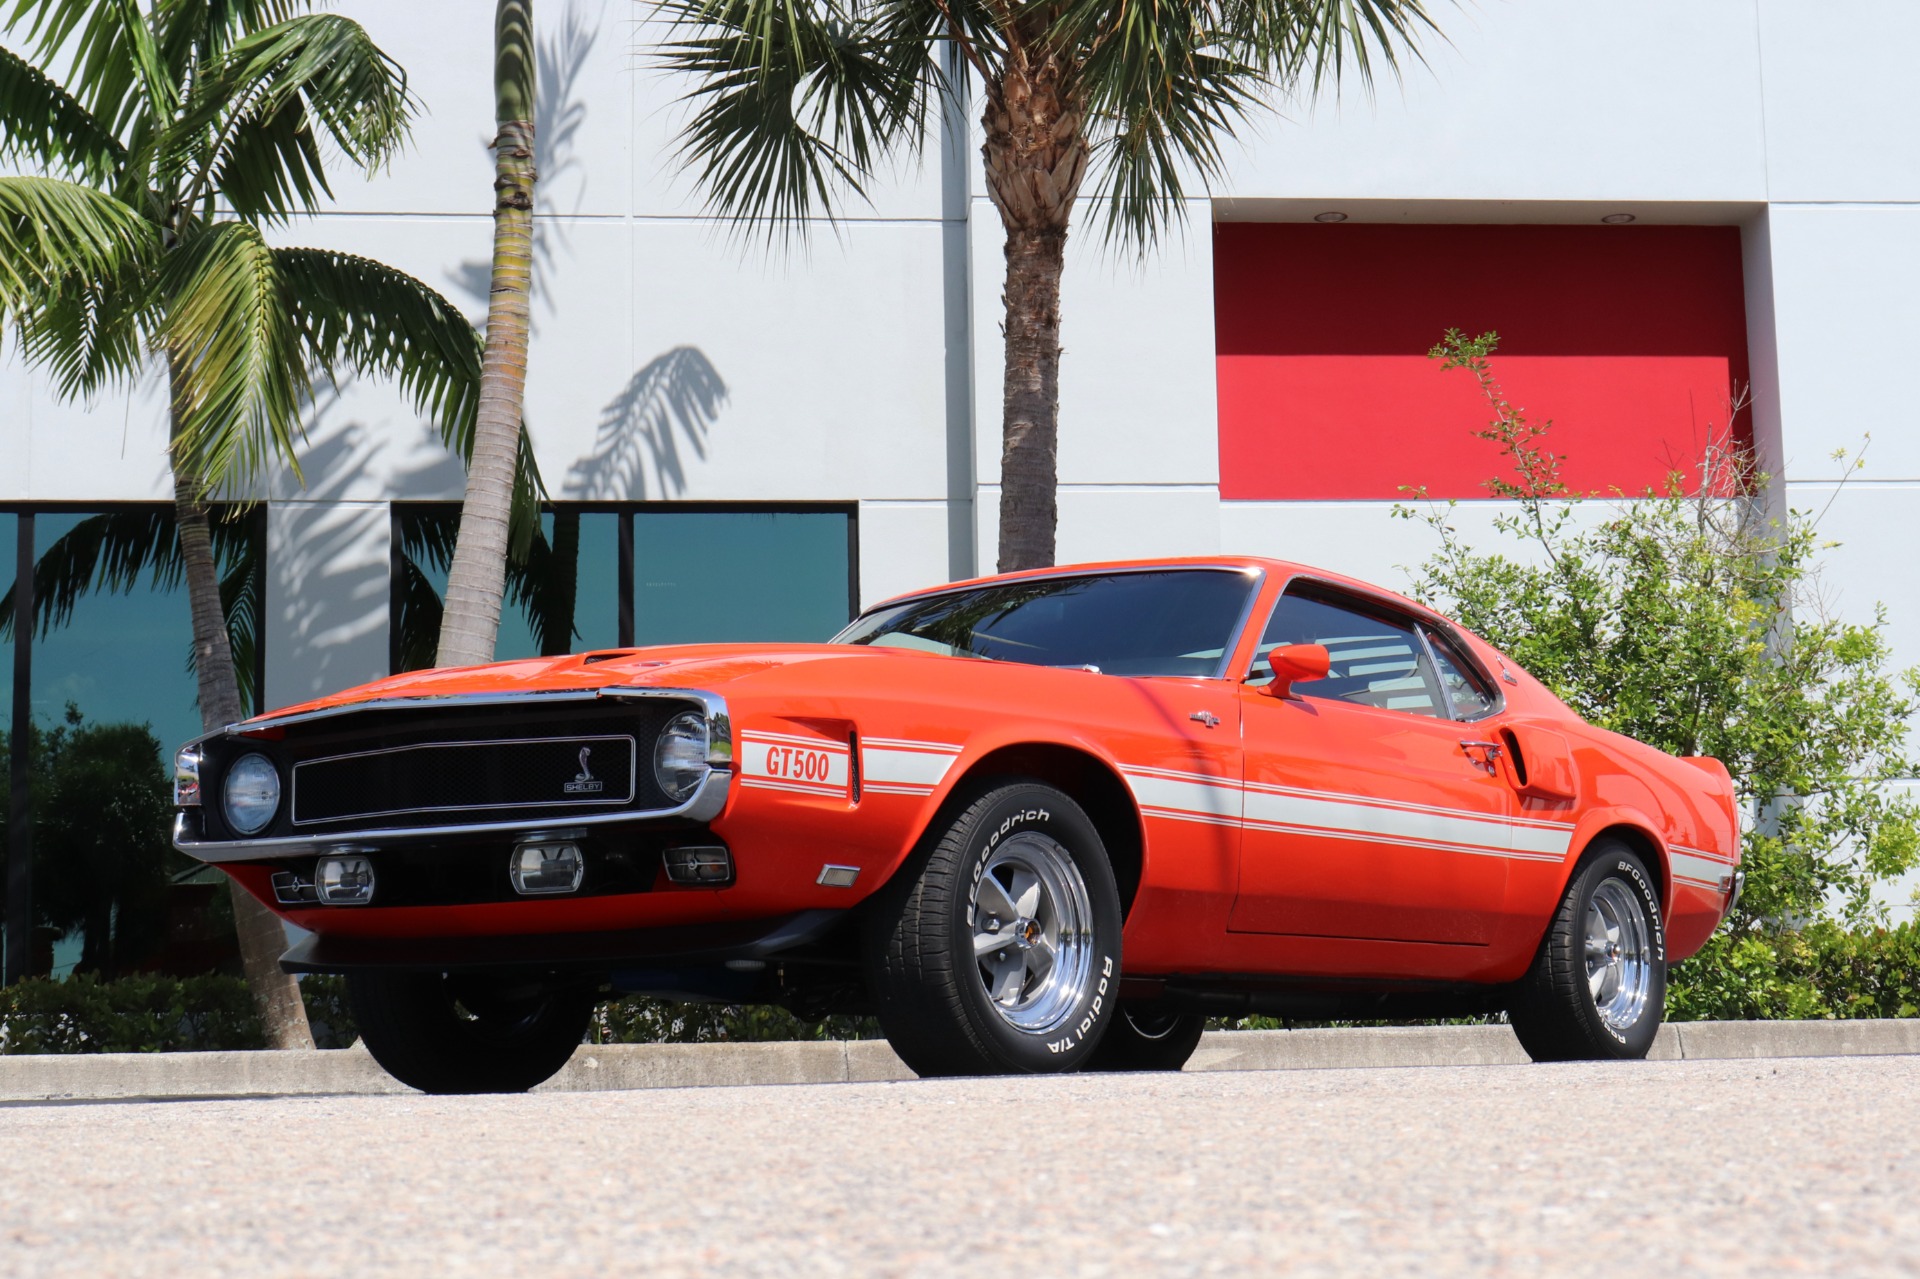 A Used Ford Shelby Mustang GT500 has a history of innovation near Delray Beach FL